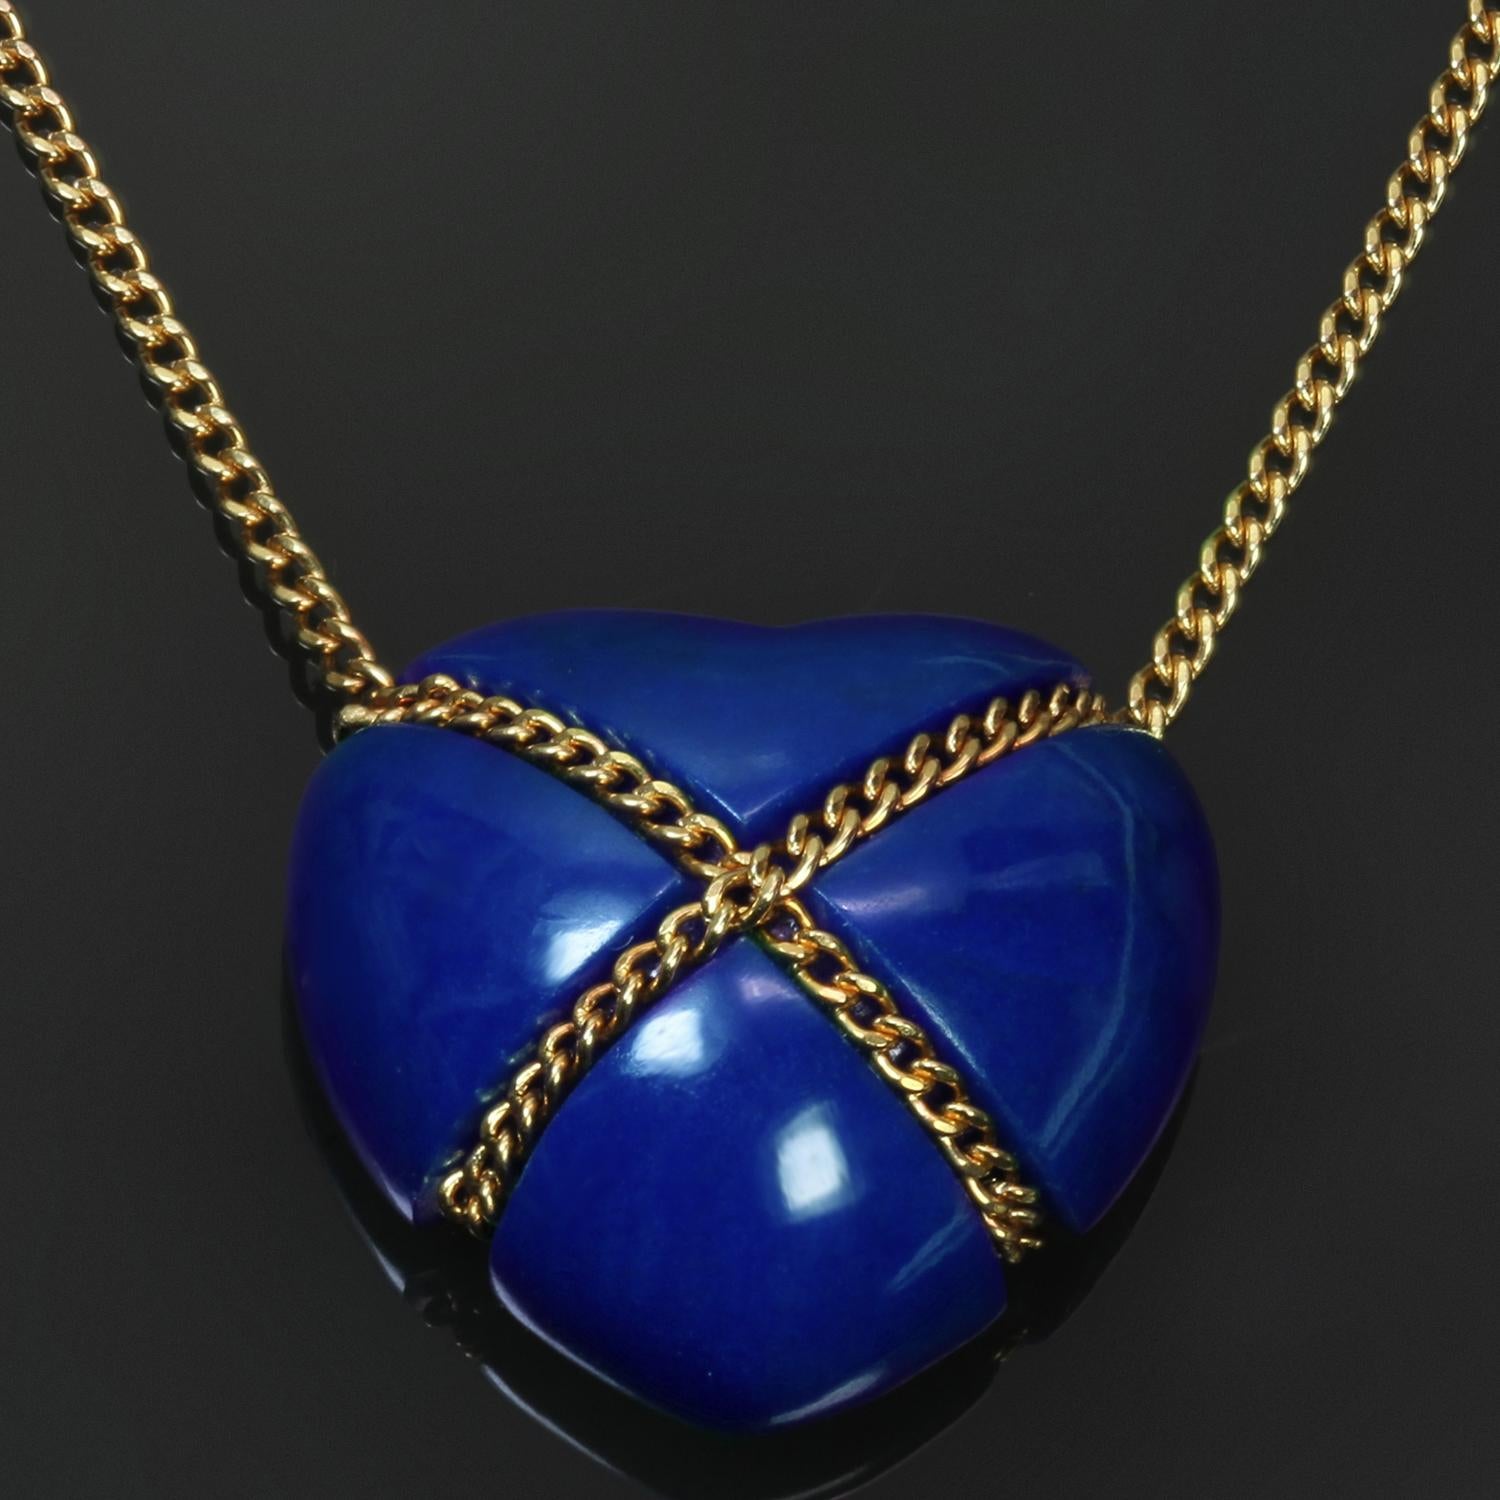 This stunning vintage necklace features a blue heart-shaped pendant crafted in lapis lazuli accented with a cross-over chain crafted in 18k yellow gold. Made in United States circa 1990s. Measurements: 0.55